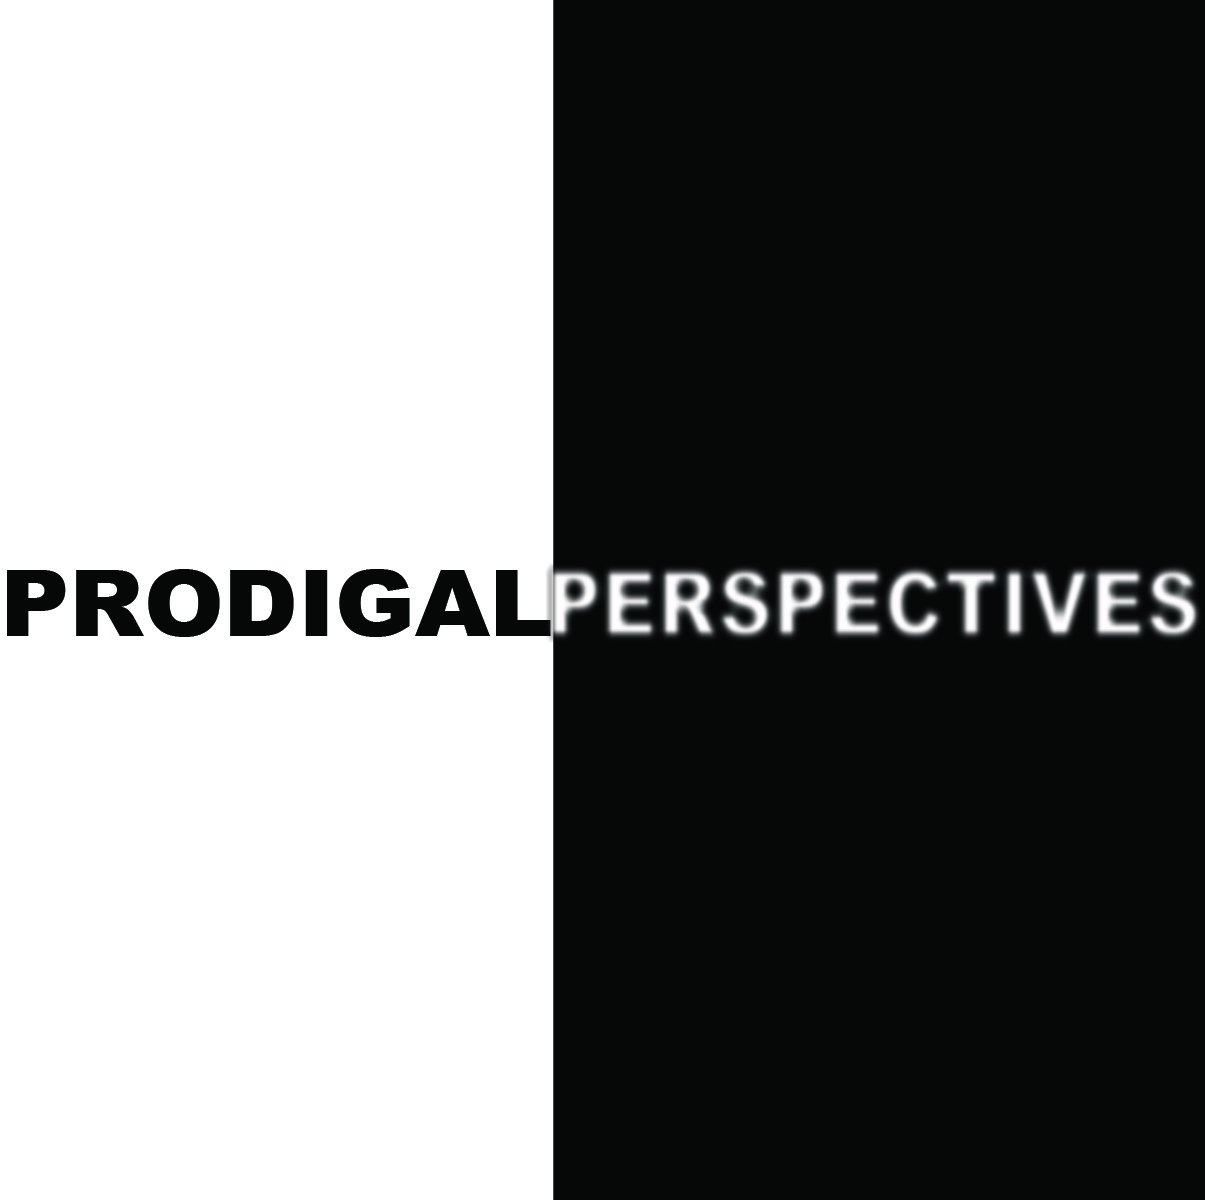 Prodigal Perspectives: The Brother